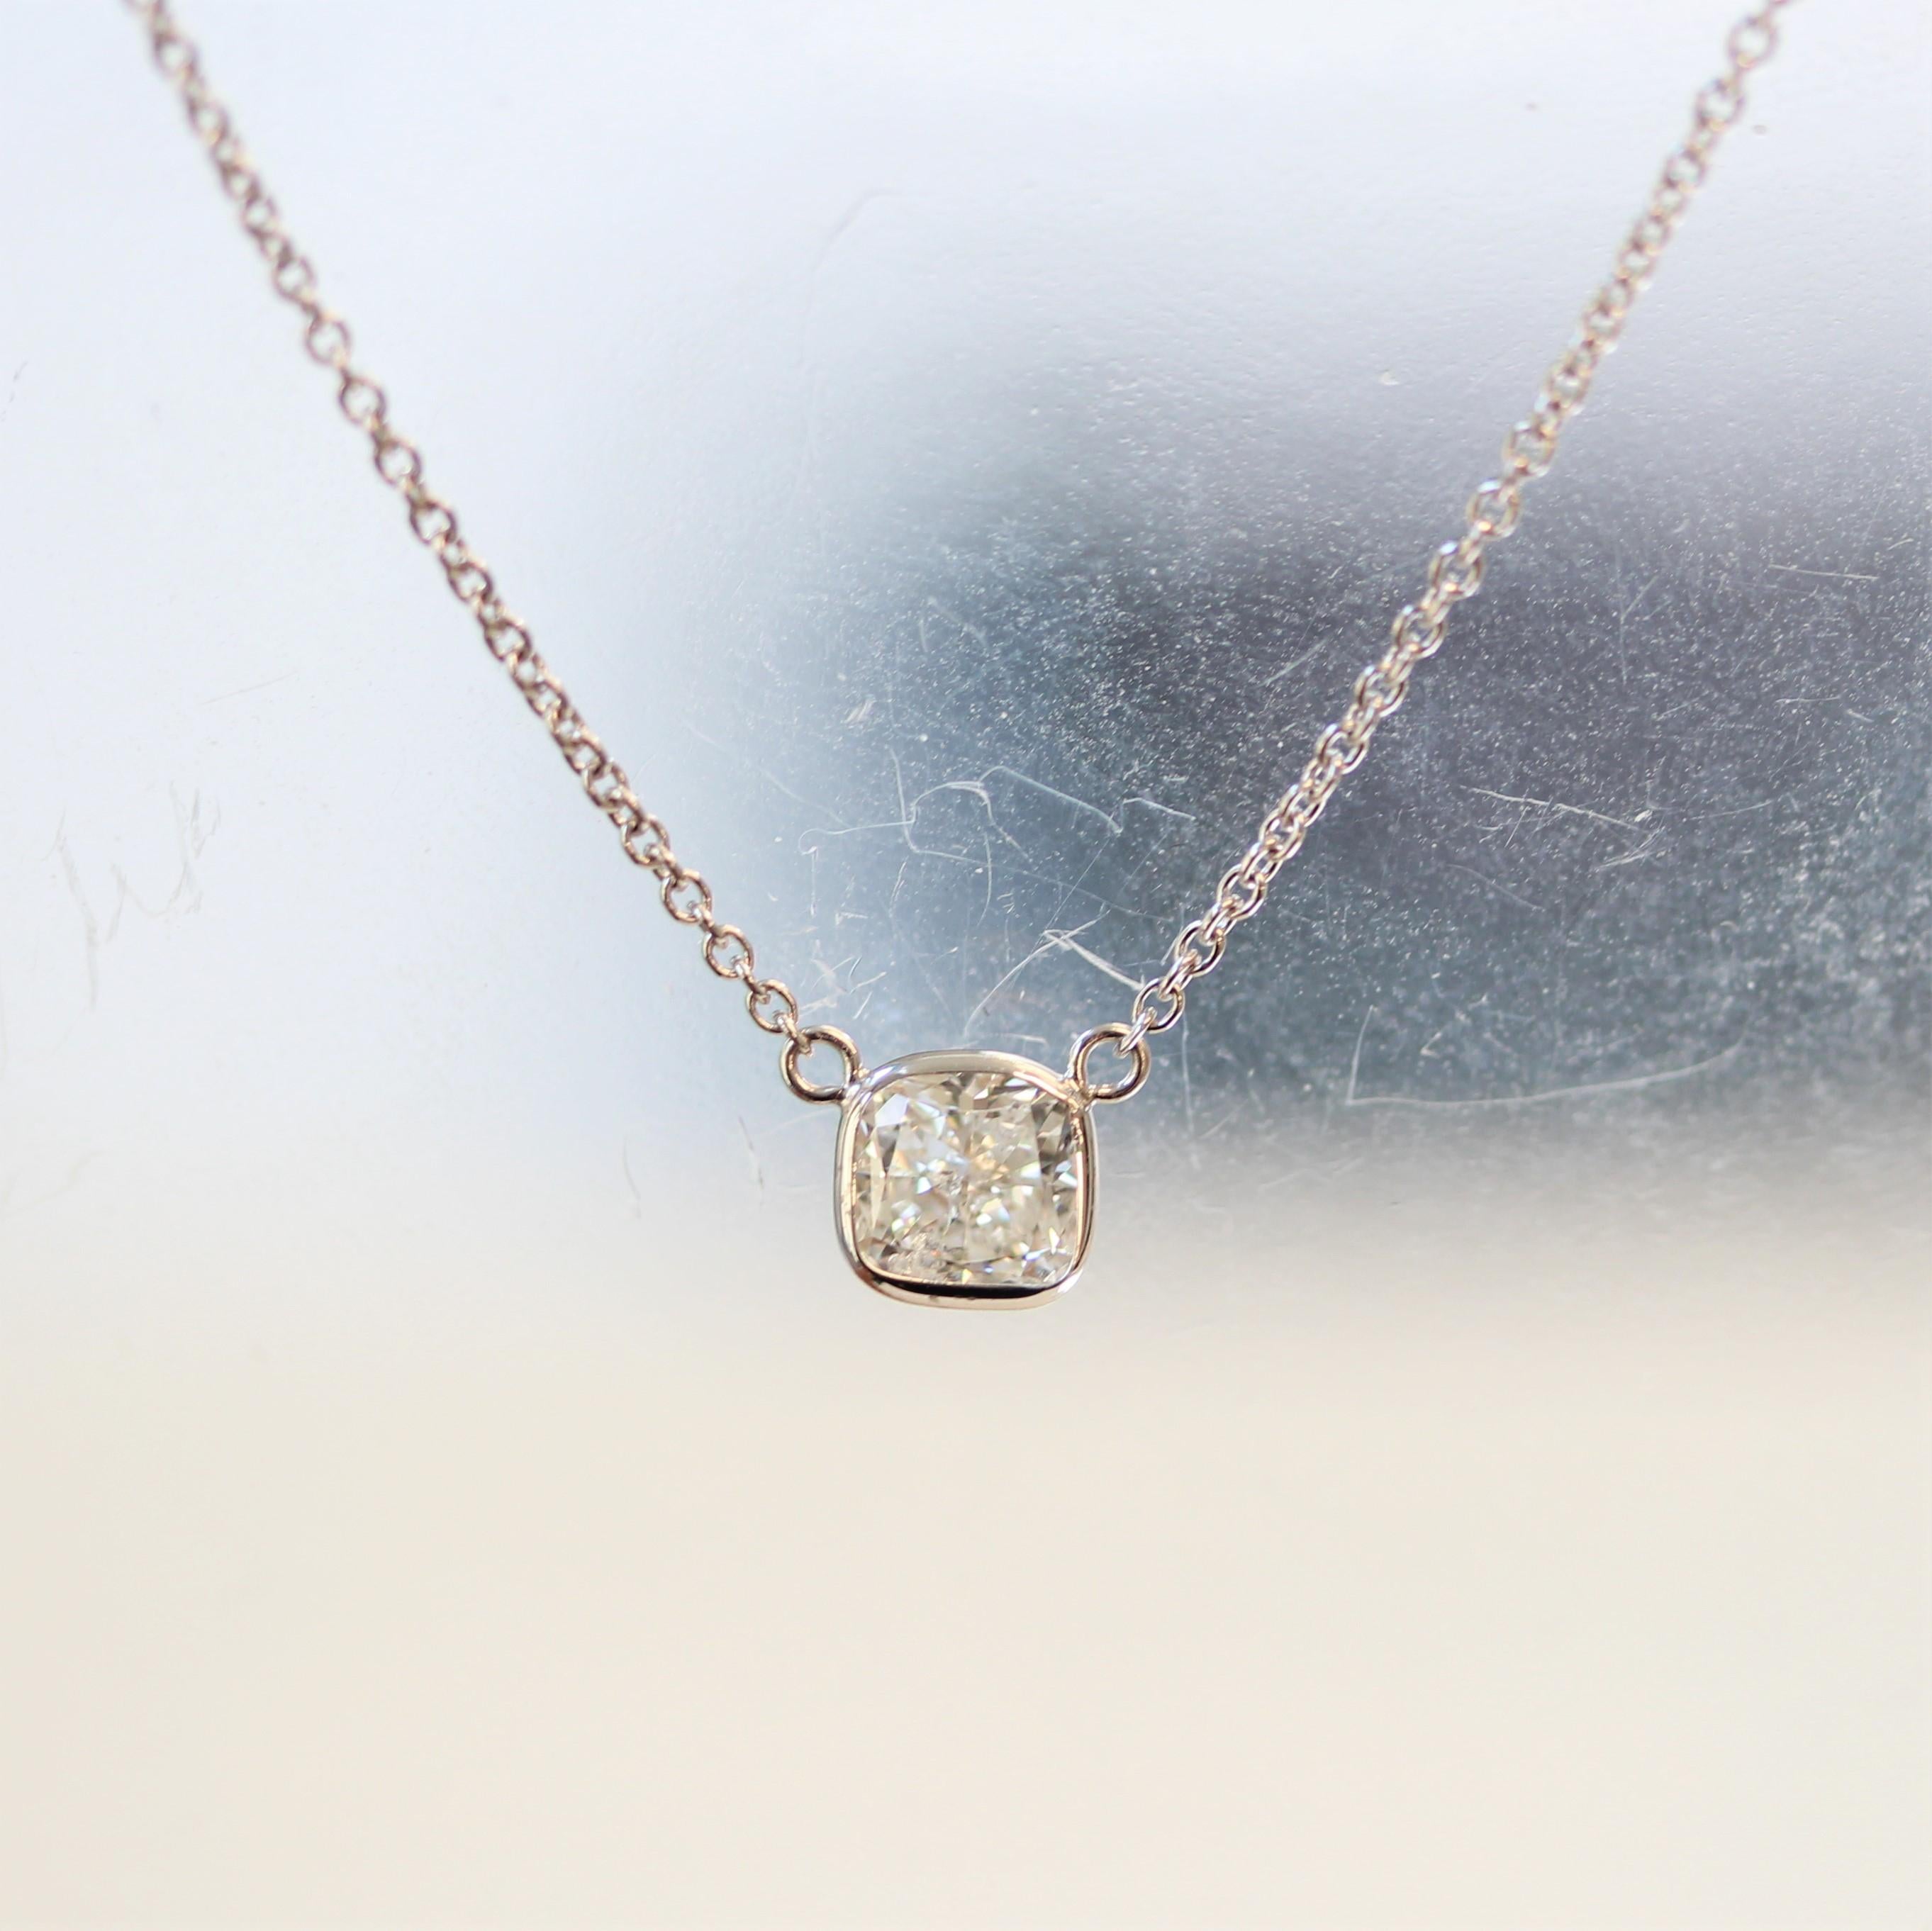 1.01 Carat Cushion Brilliant Diamond Handmade Solitaire Necklace In 14k WG For Sale